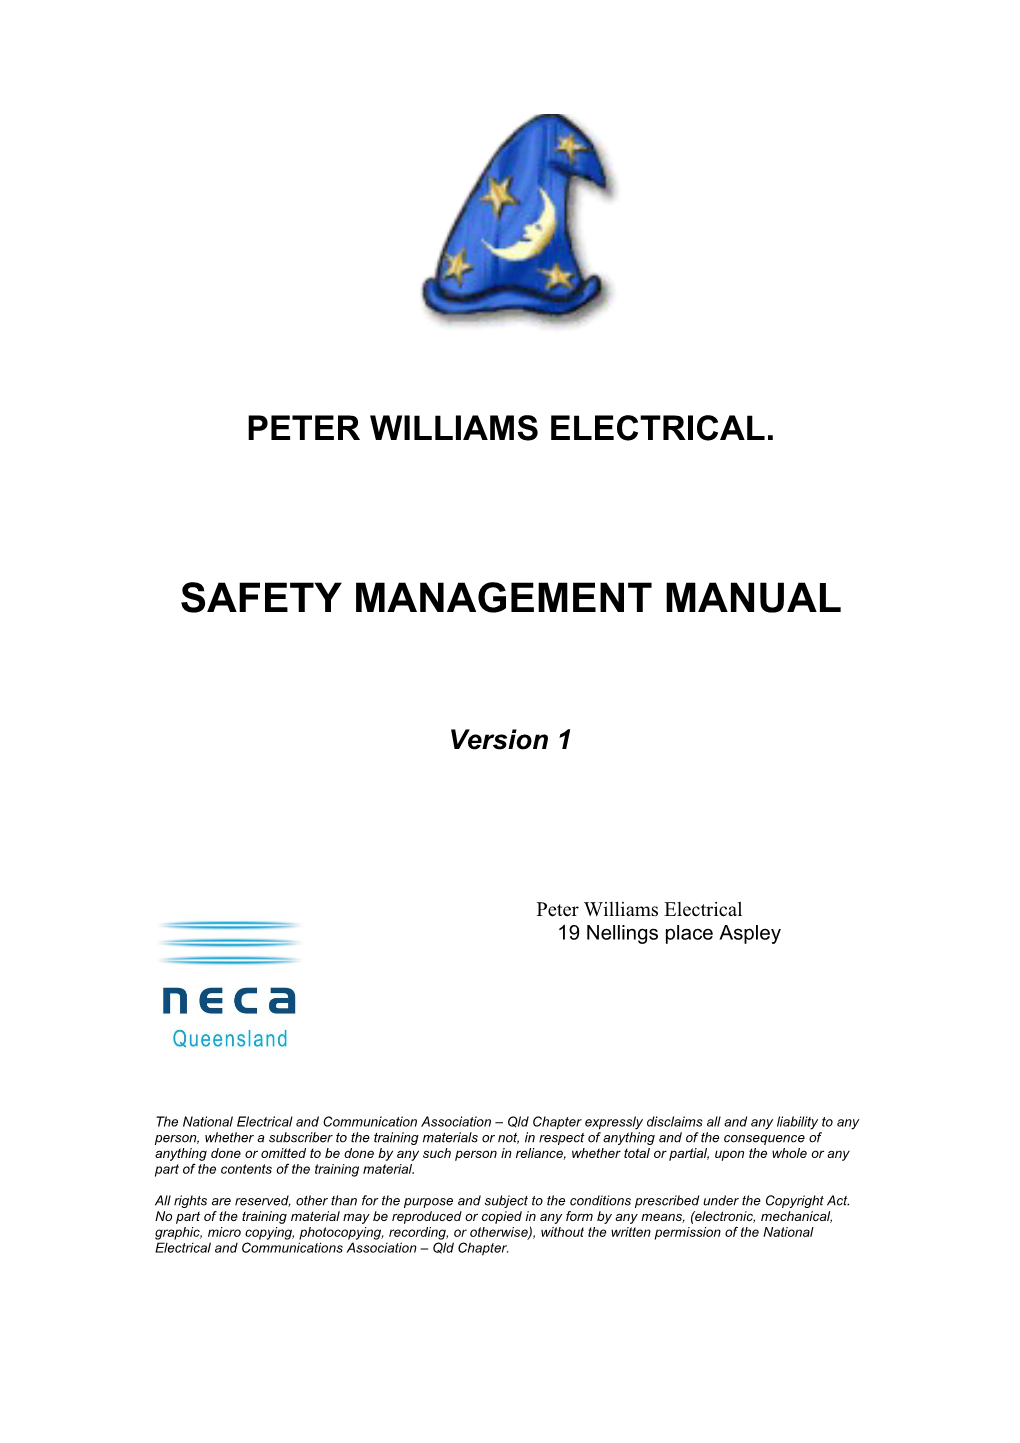 Peter Williams Electrical